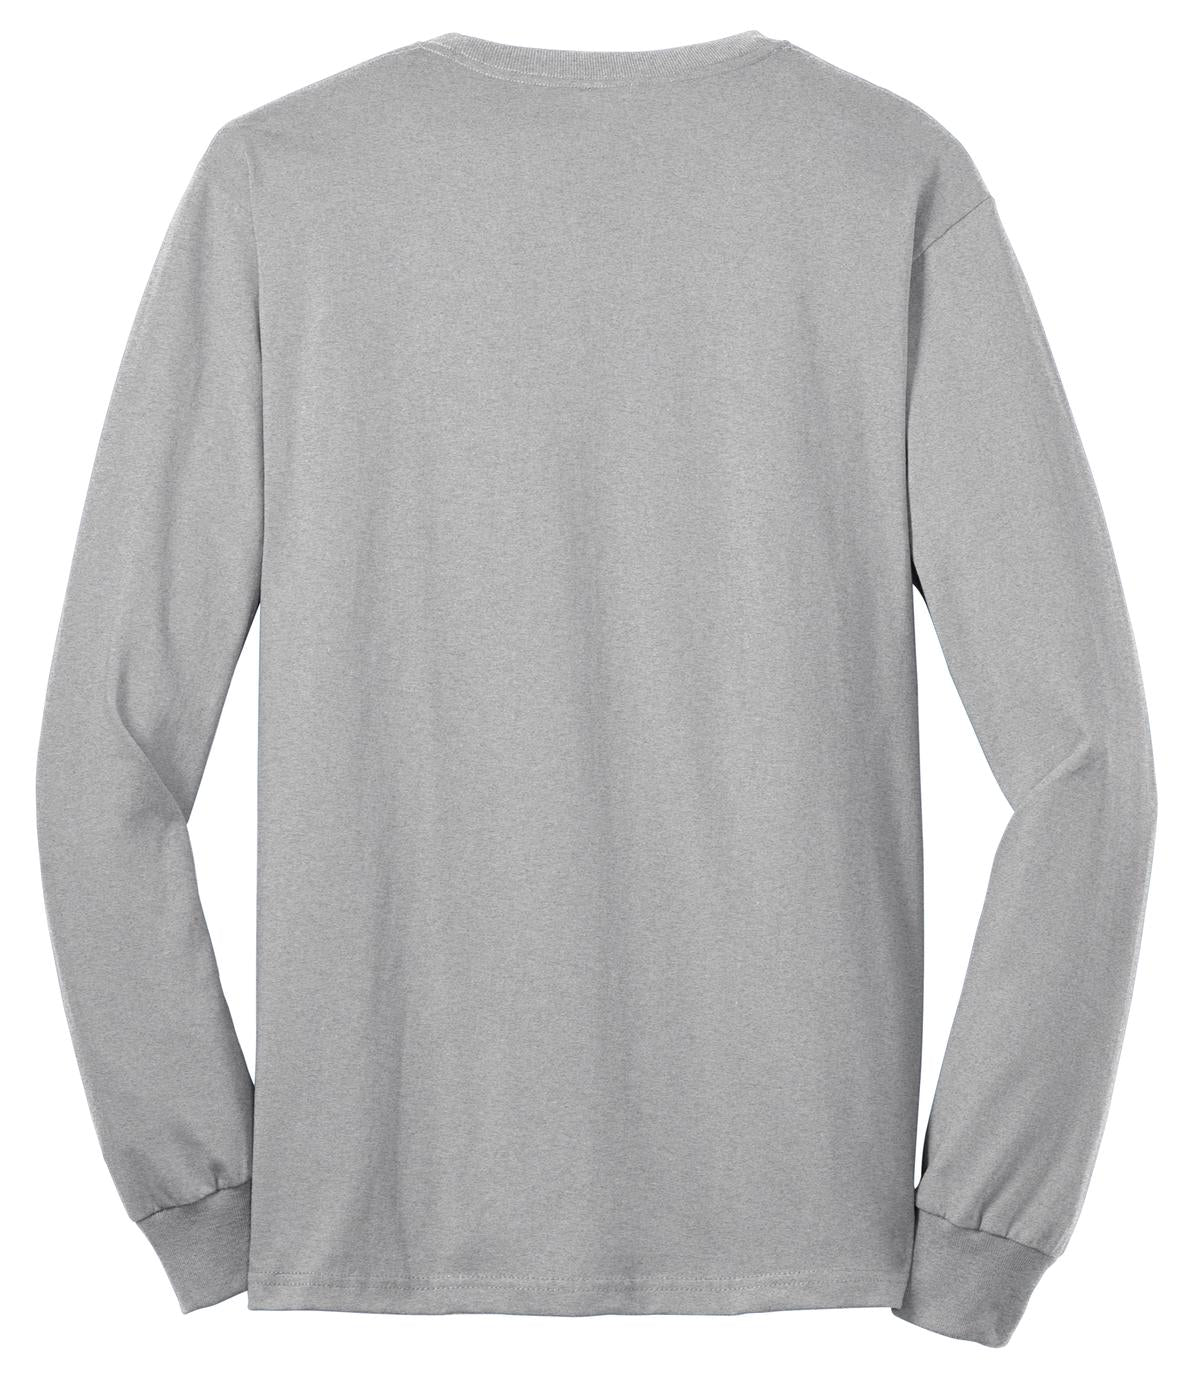 Swaasi Core - P&C® 5.5 oz 50/50 LONG-SLEEVE T-Shirt with Print Logo